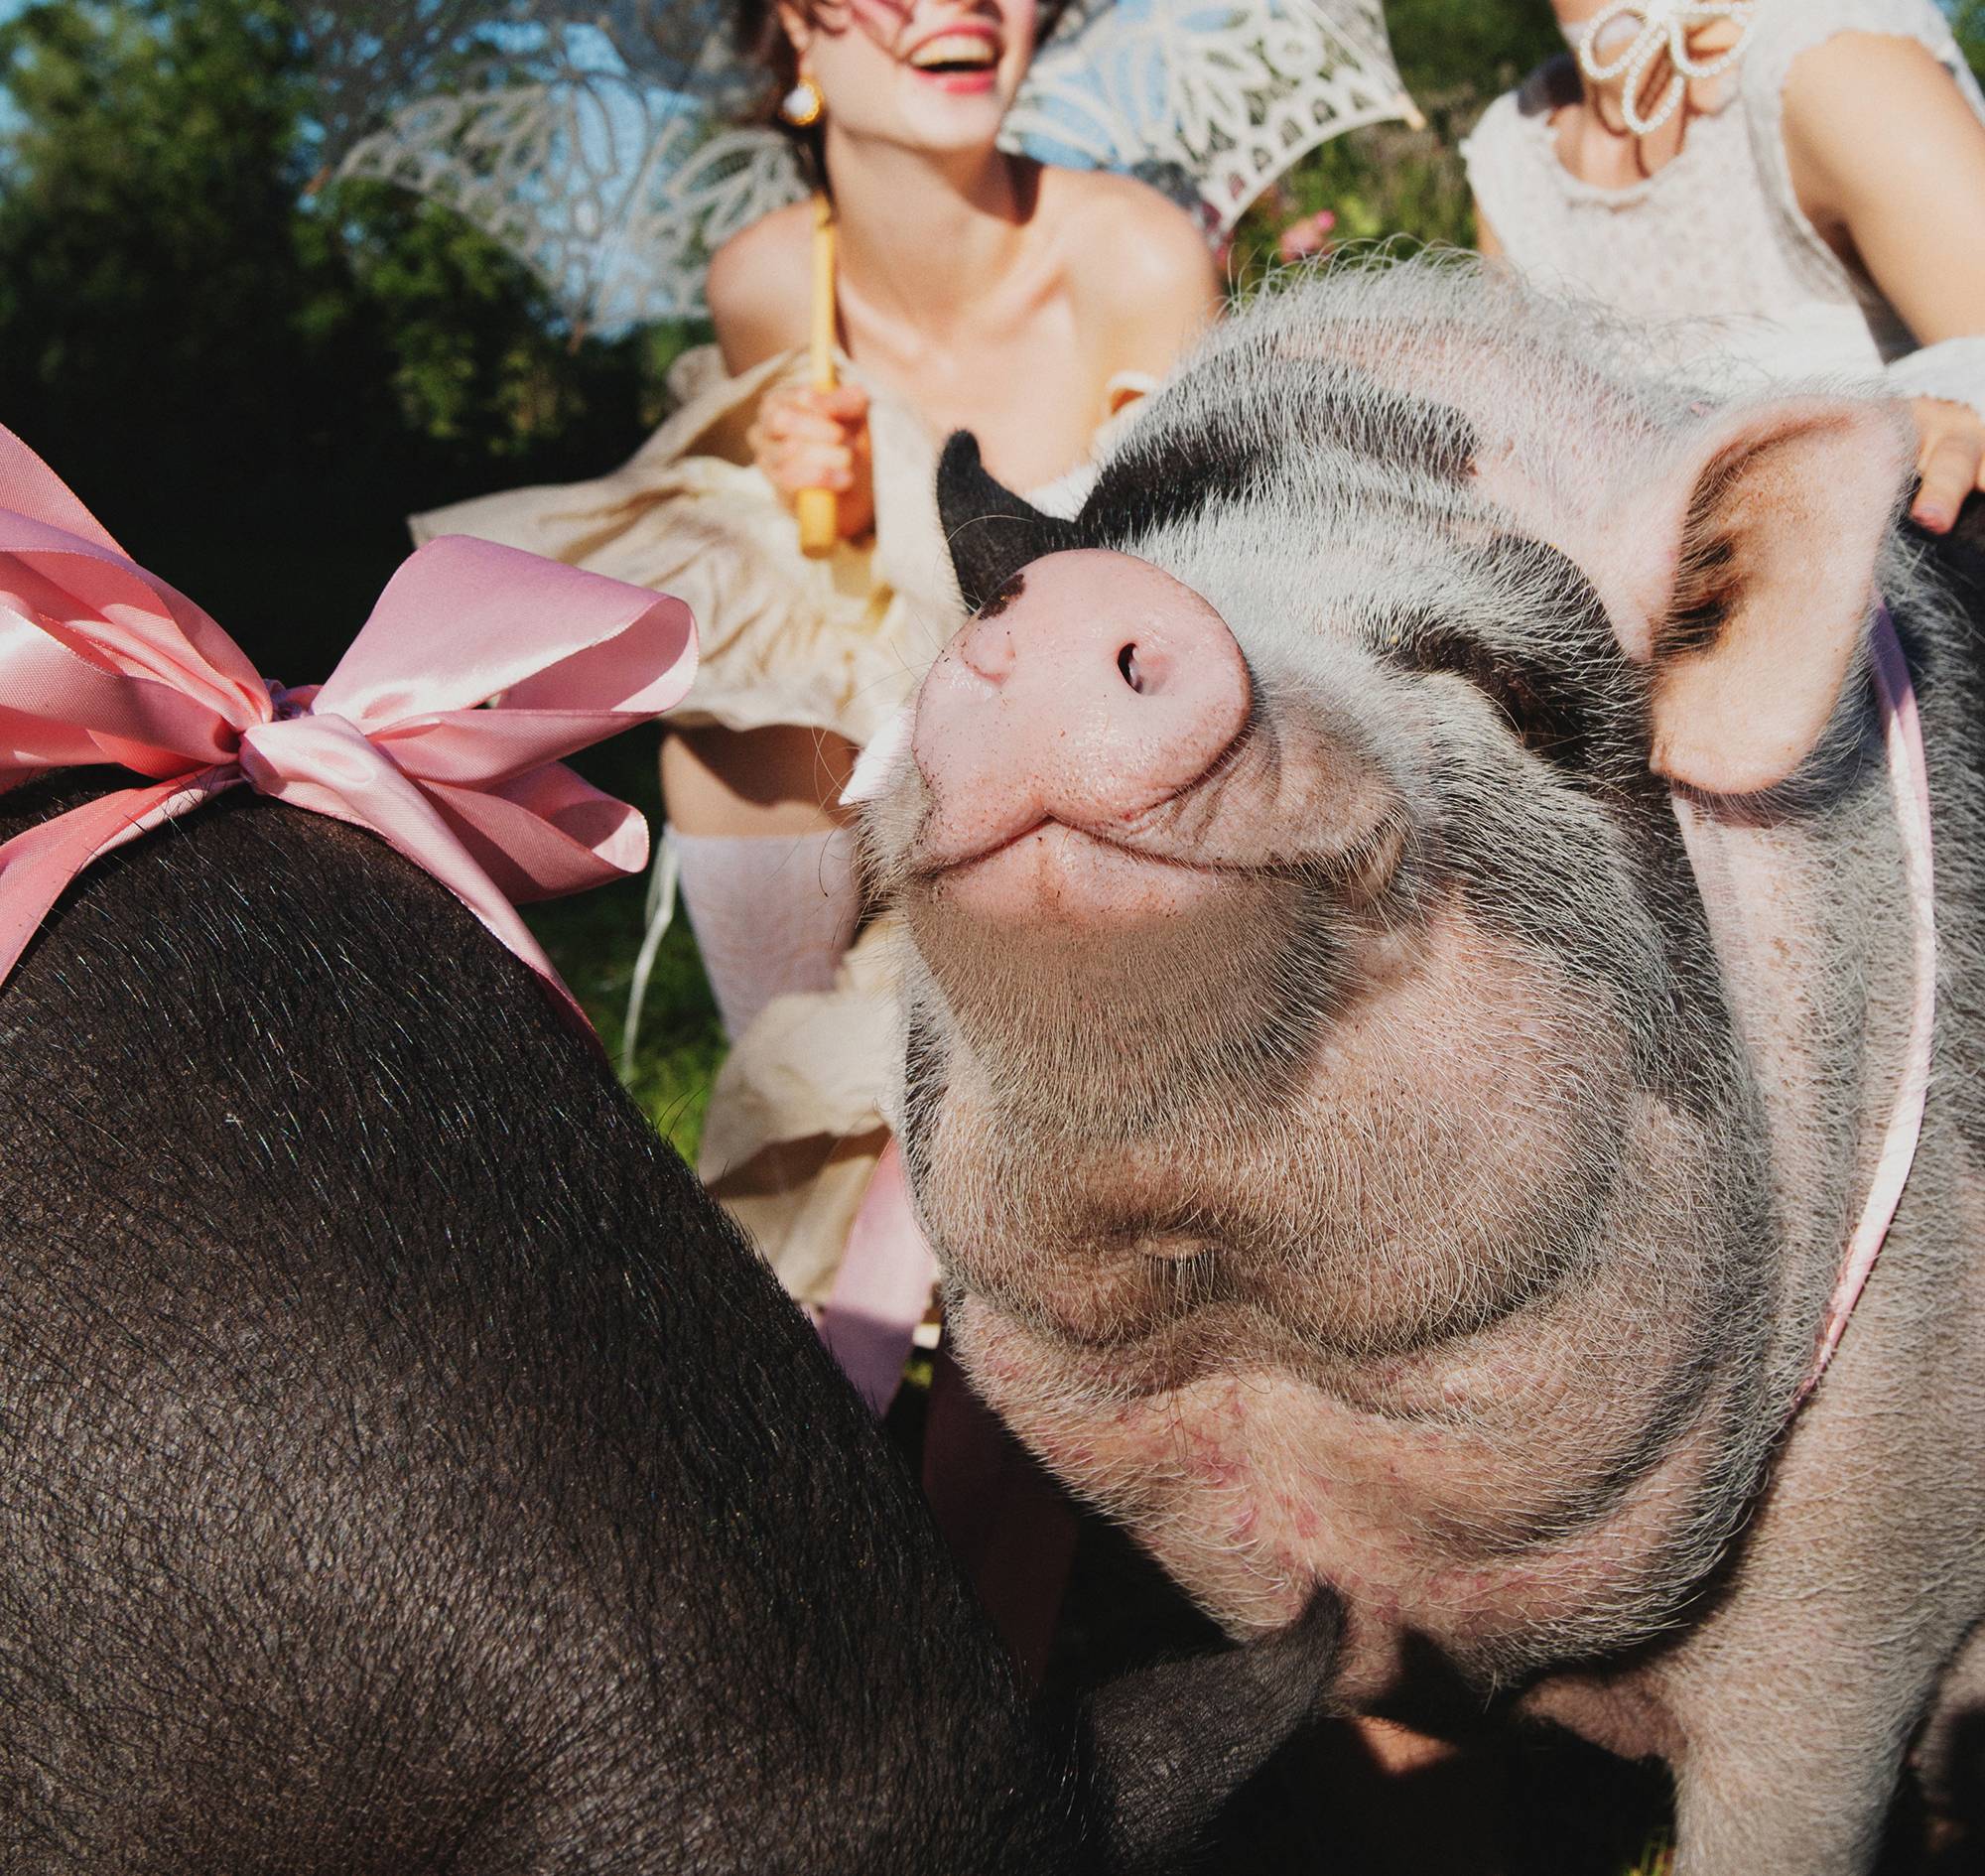 Two pigs with a pink bow on its heads and smiling girls in the background.